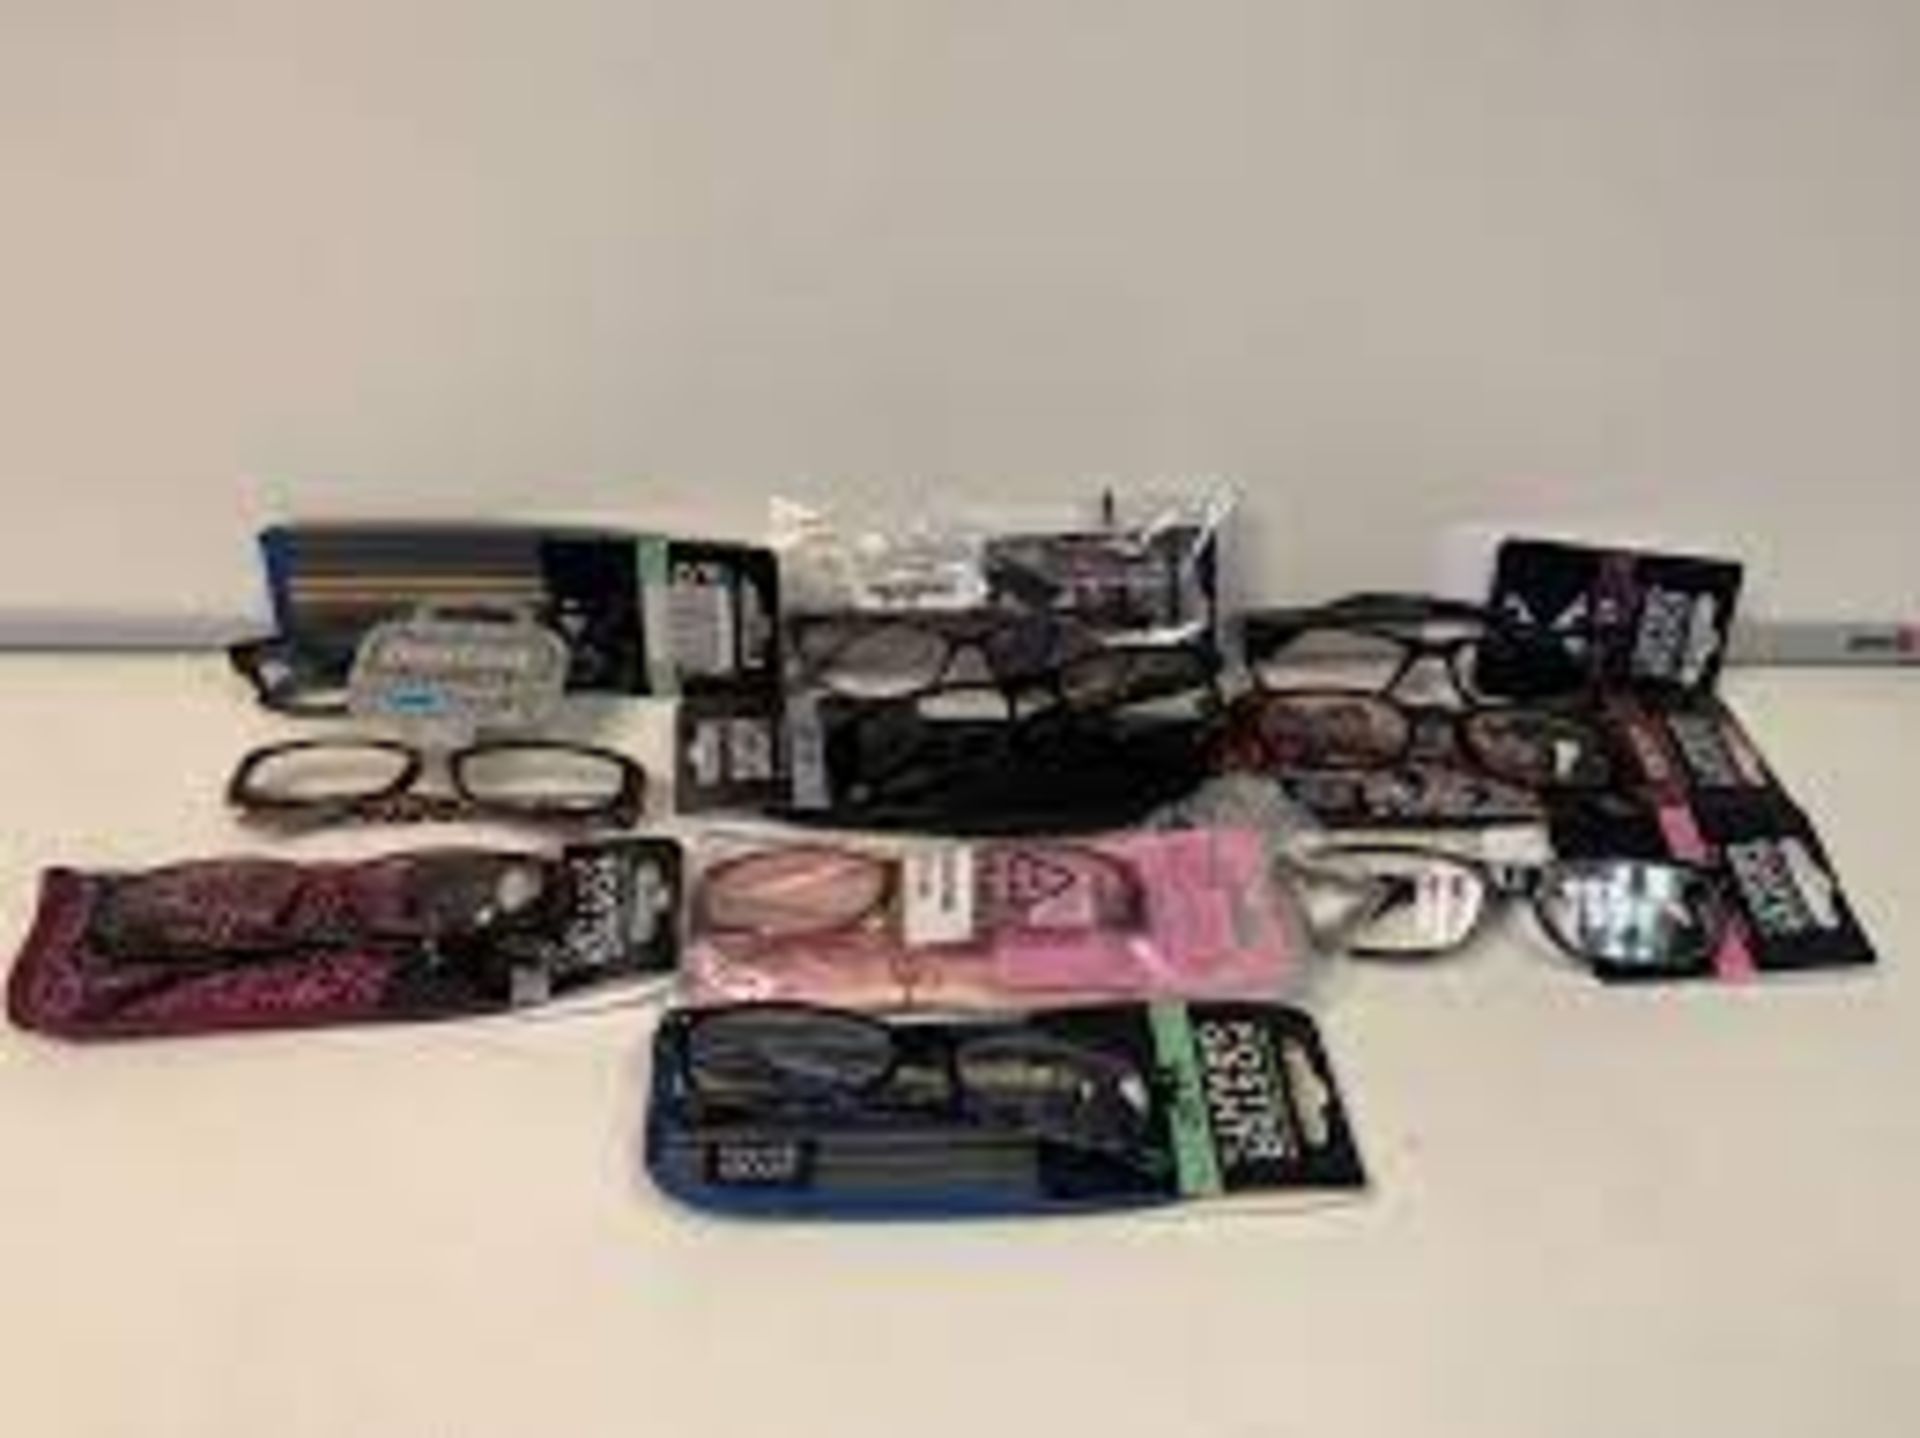 40 X BRAND NEW FOSTER GRANT GLASSES/SUNGLASSES IN VARIOUS STYLES RRP £12-40 EACH. (ROW19.4)